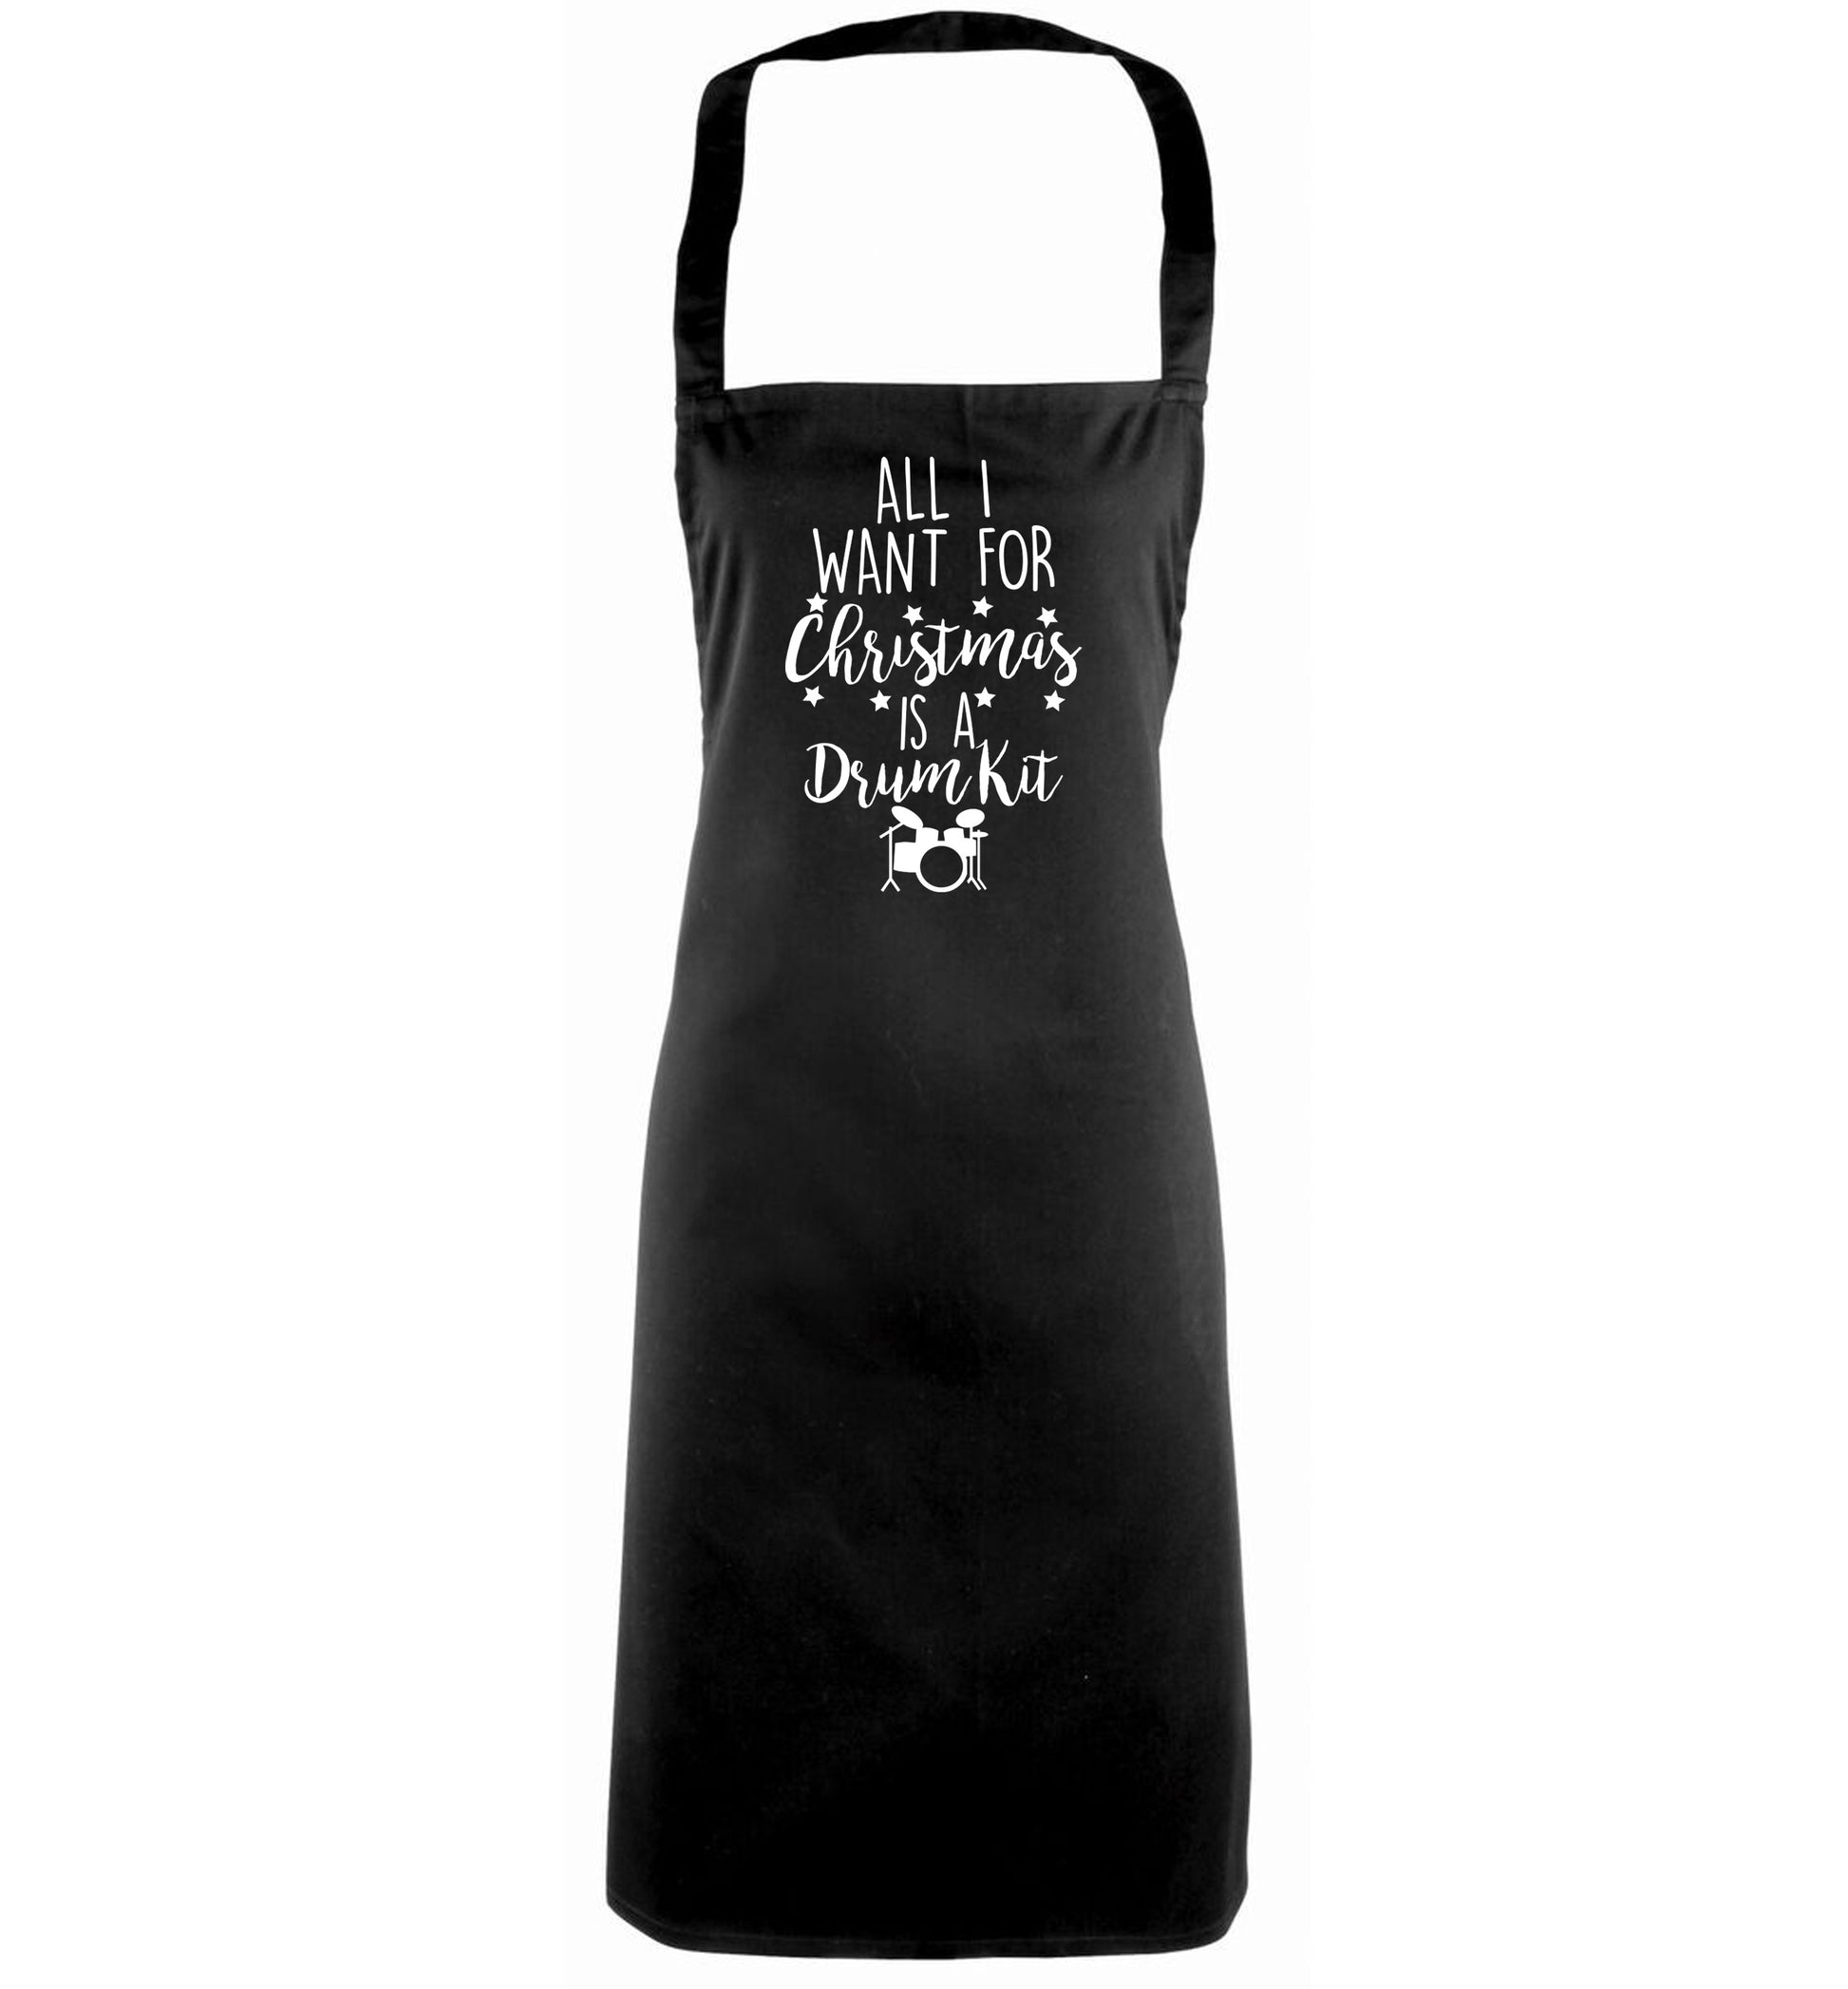 All I want for Christmas is a drum kit! black apron